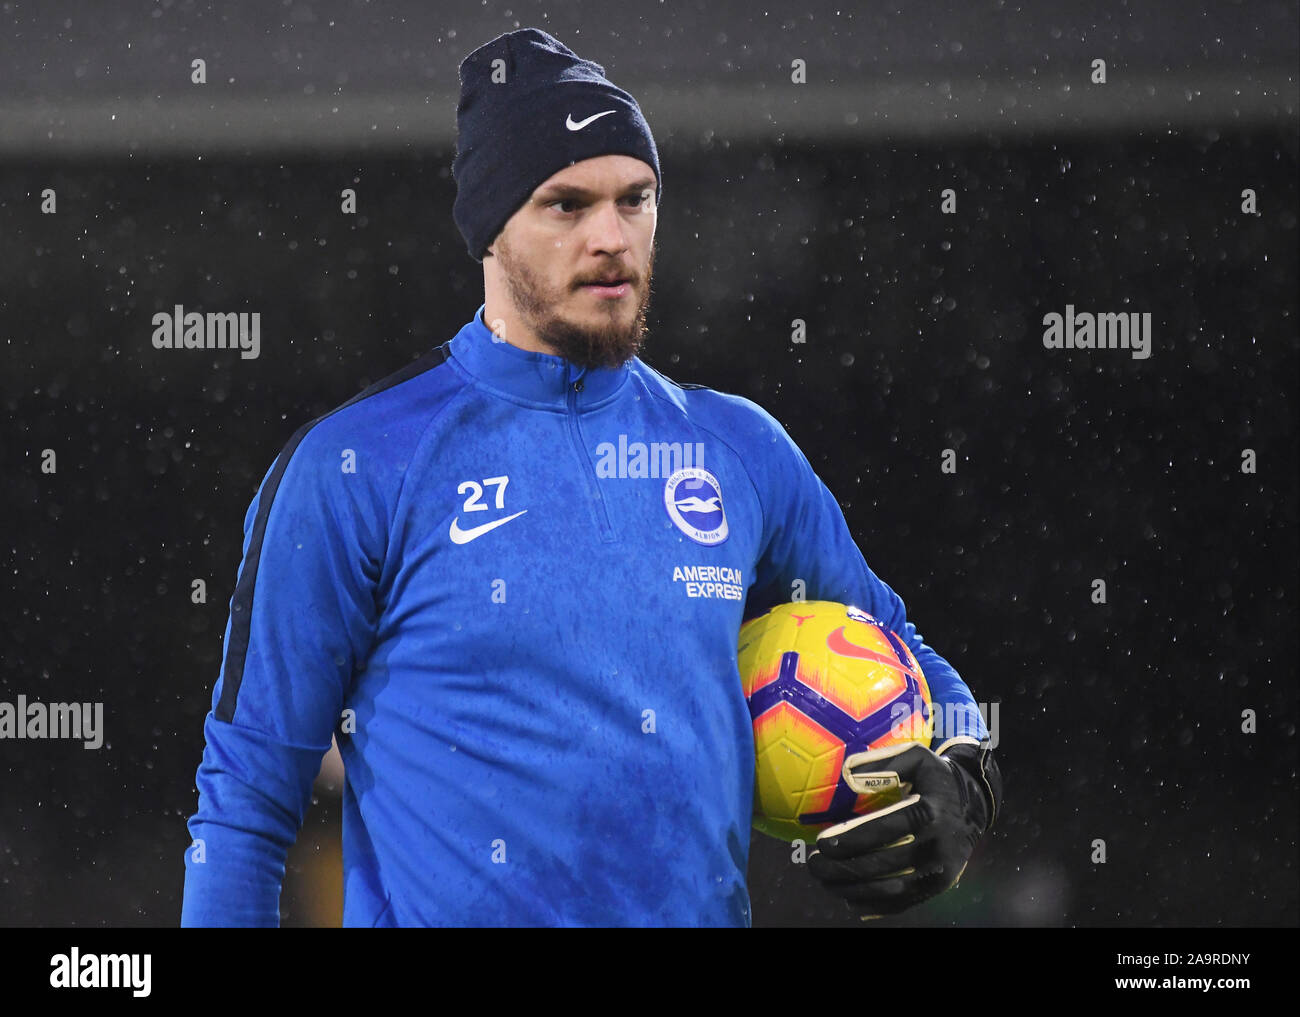 LONDON, ENGLAND - JANUARY 29, 2019: David Button of Brighton pictured prior to the 2018/19 Premier League game between Fulham FC and Brighton and Hove Albion at Craven Cottage. Stock Photo